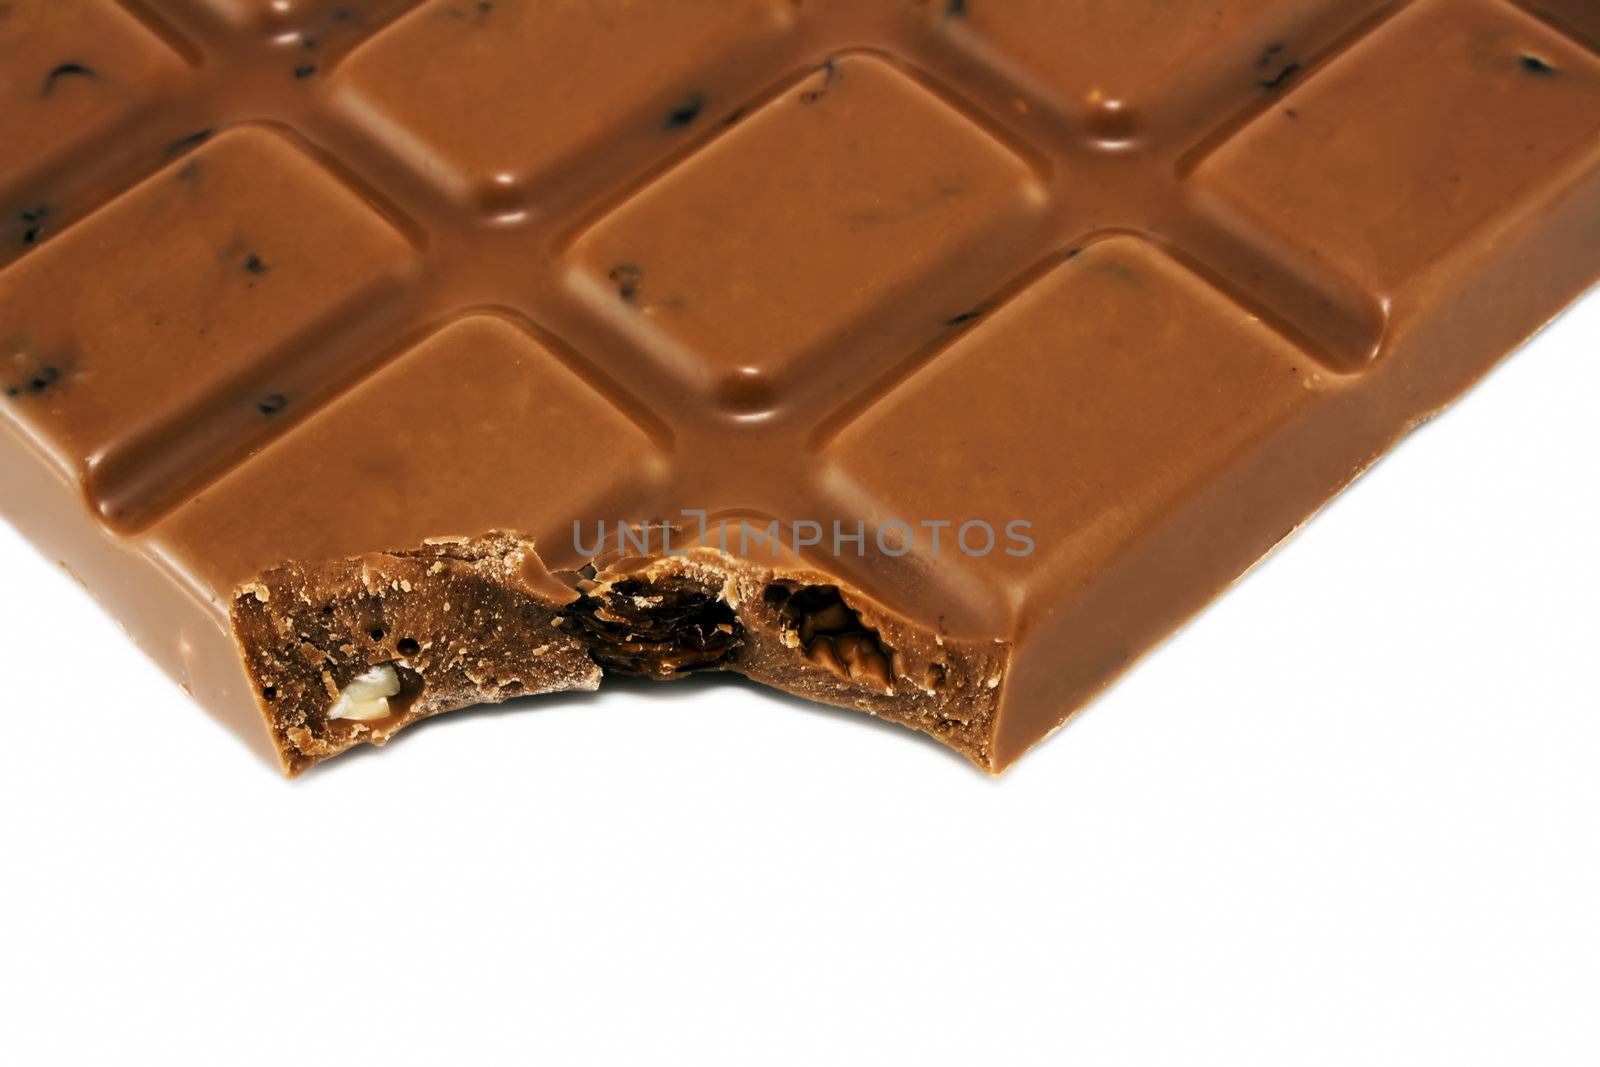 Milk chocolate bar by magraphics